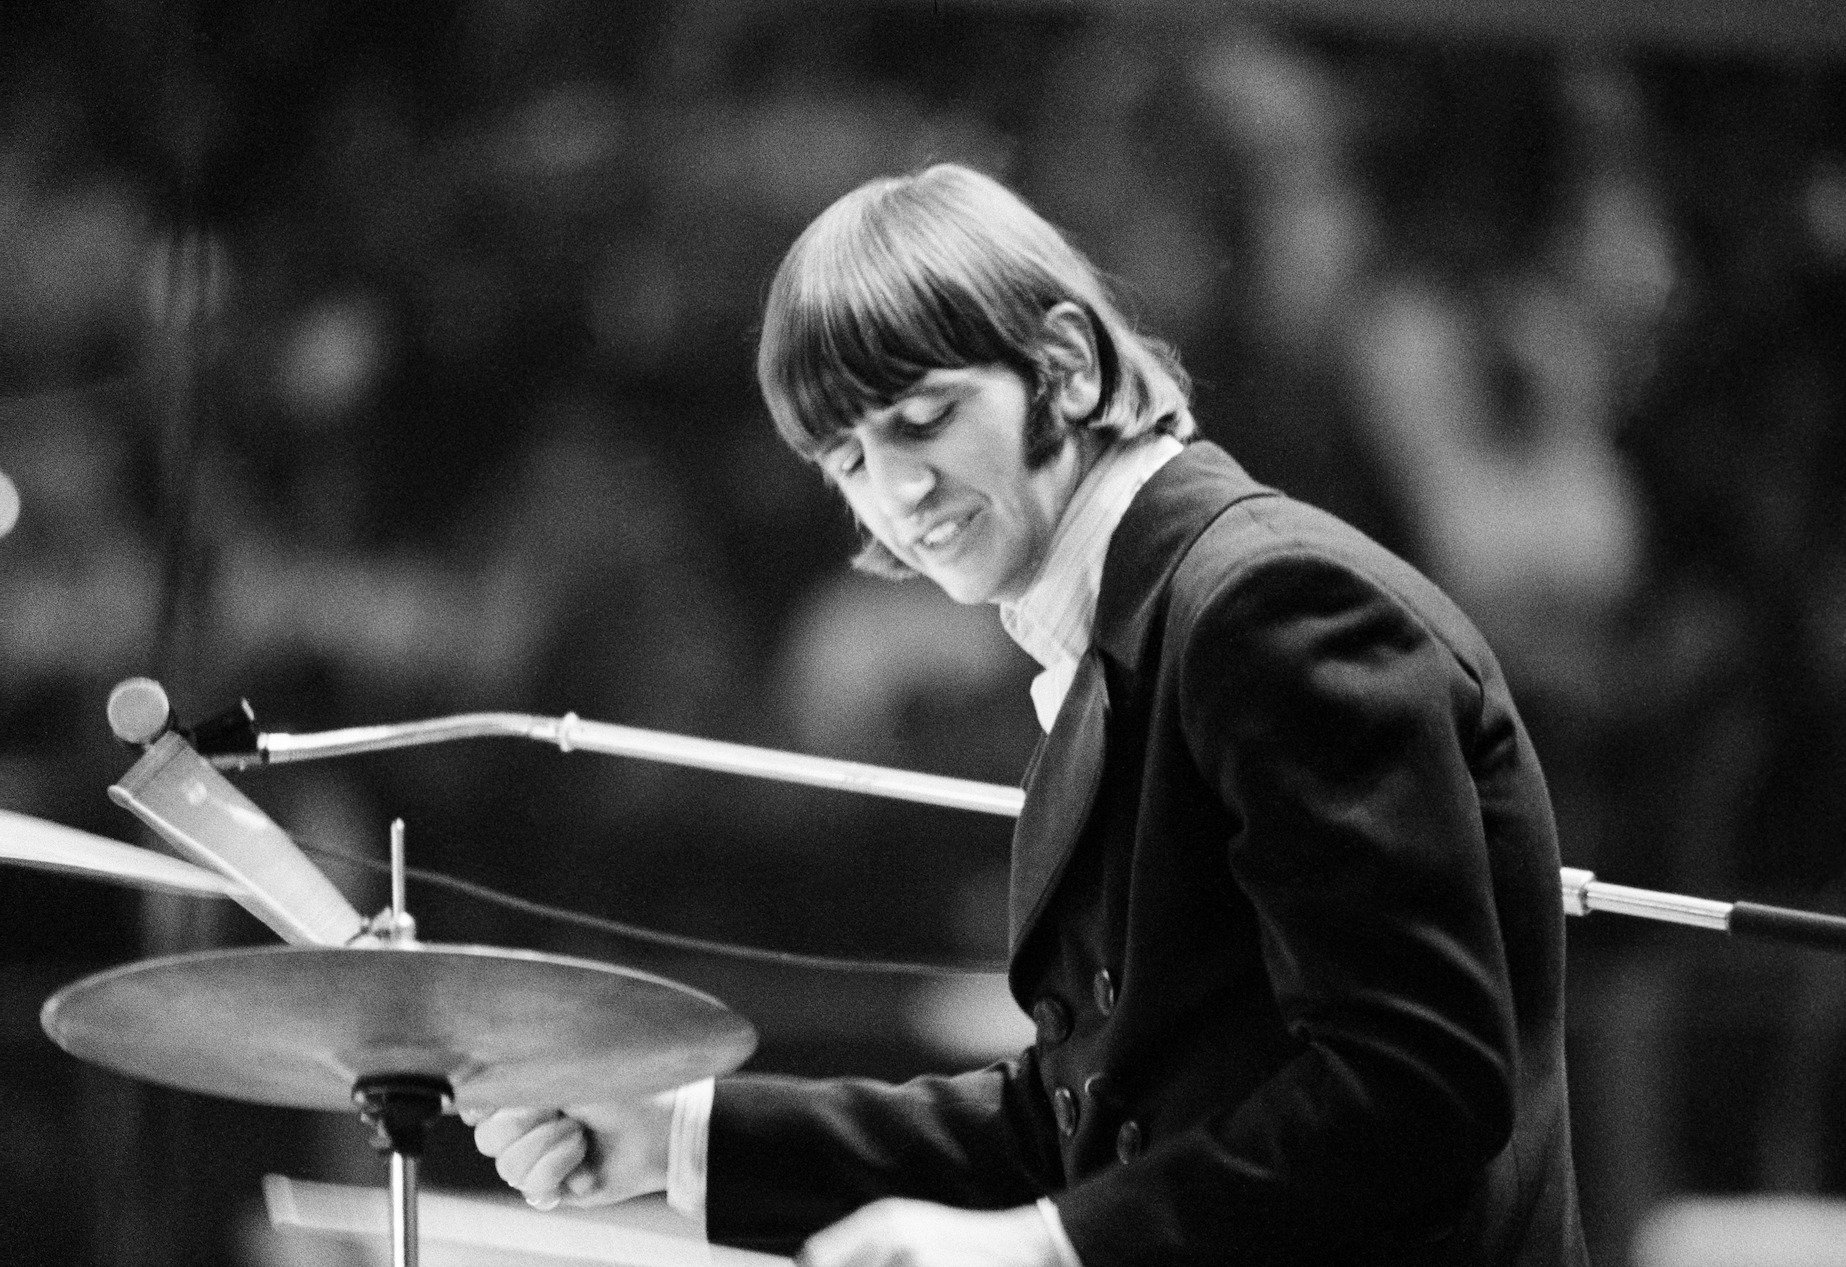 Ringo Starr performs with The Beatles in Germany